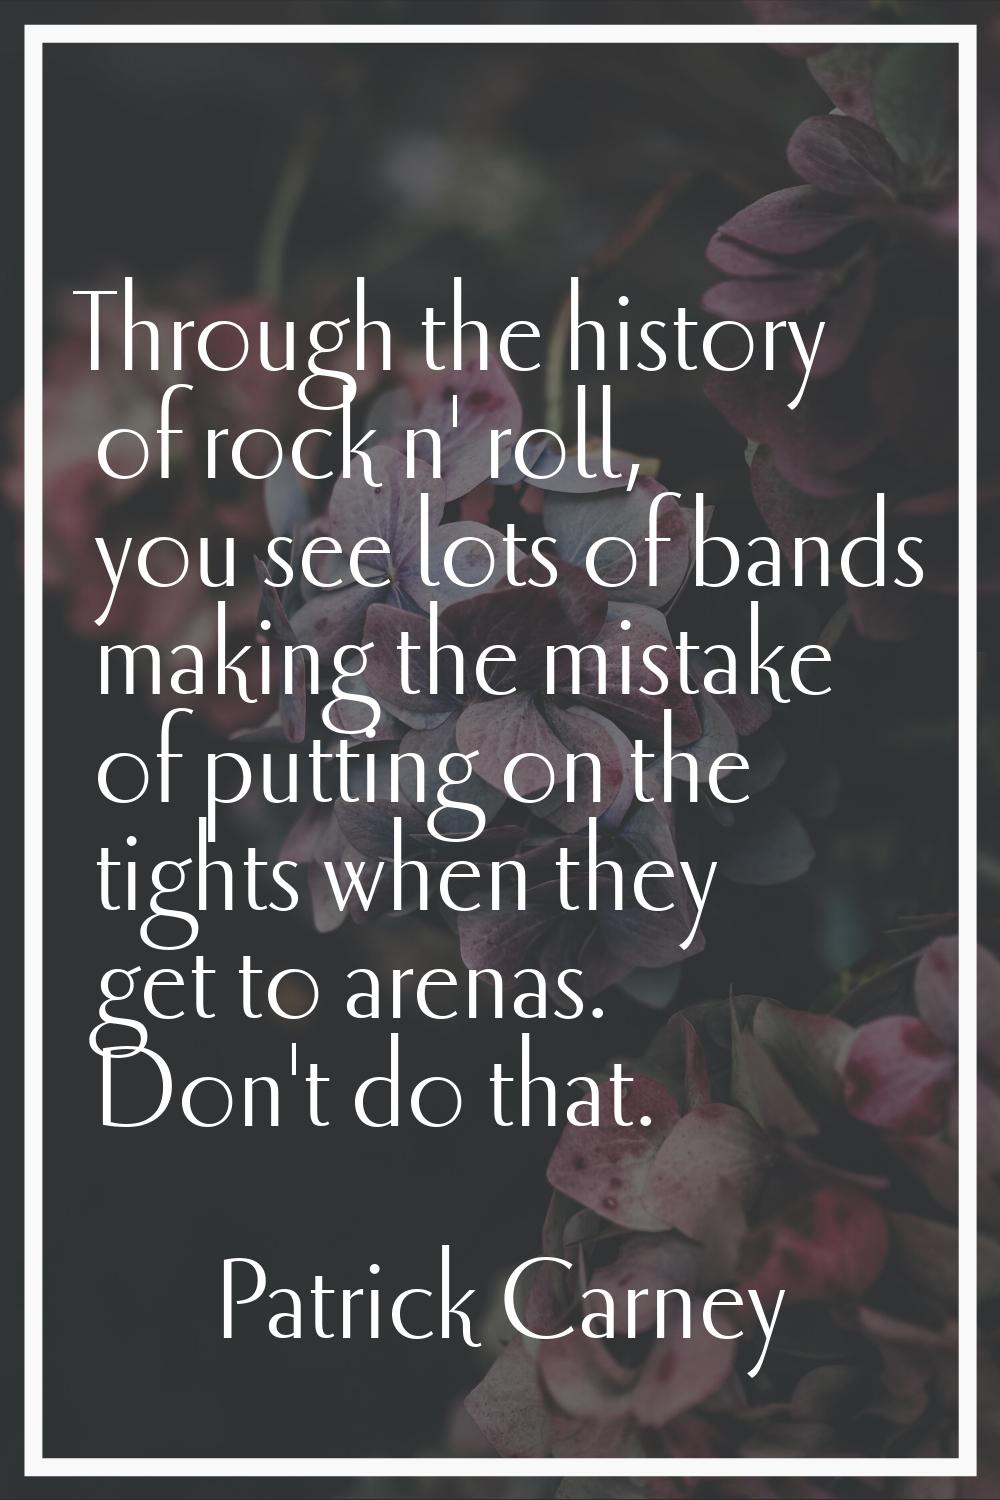 Through the history of rock n' roll, you see lots of bands making the mistake of putting on the tig